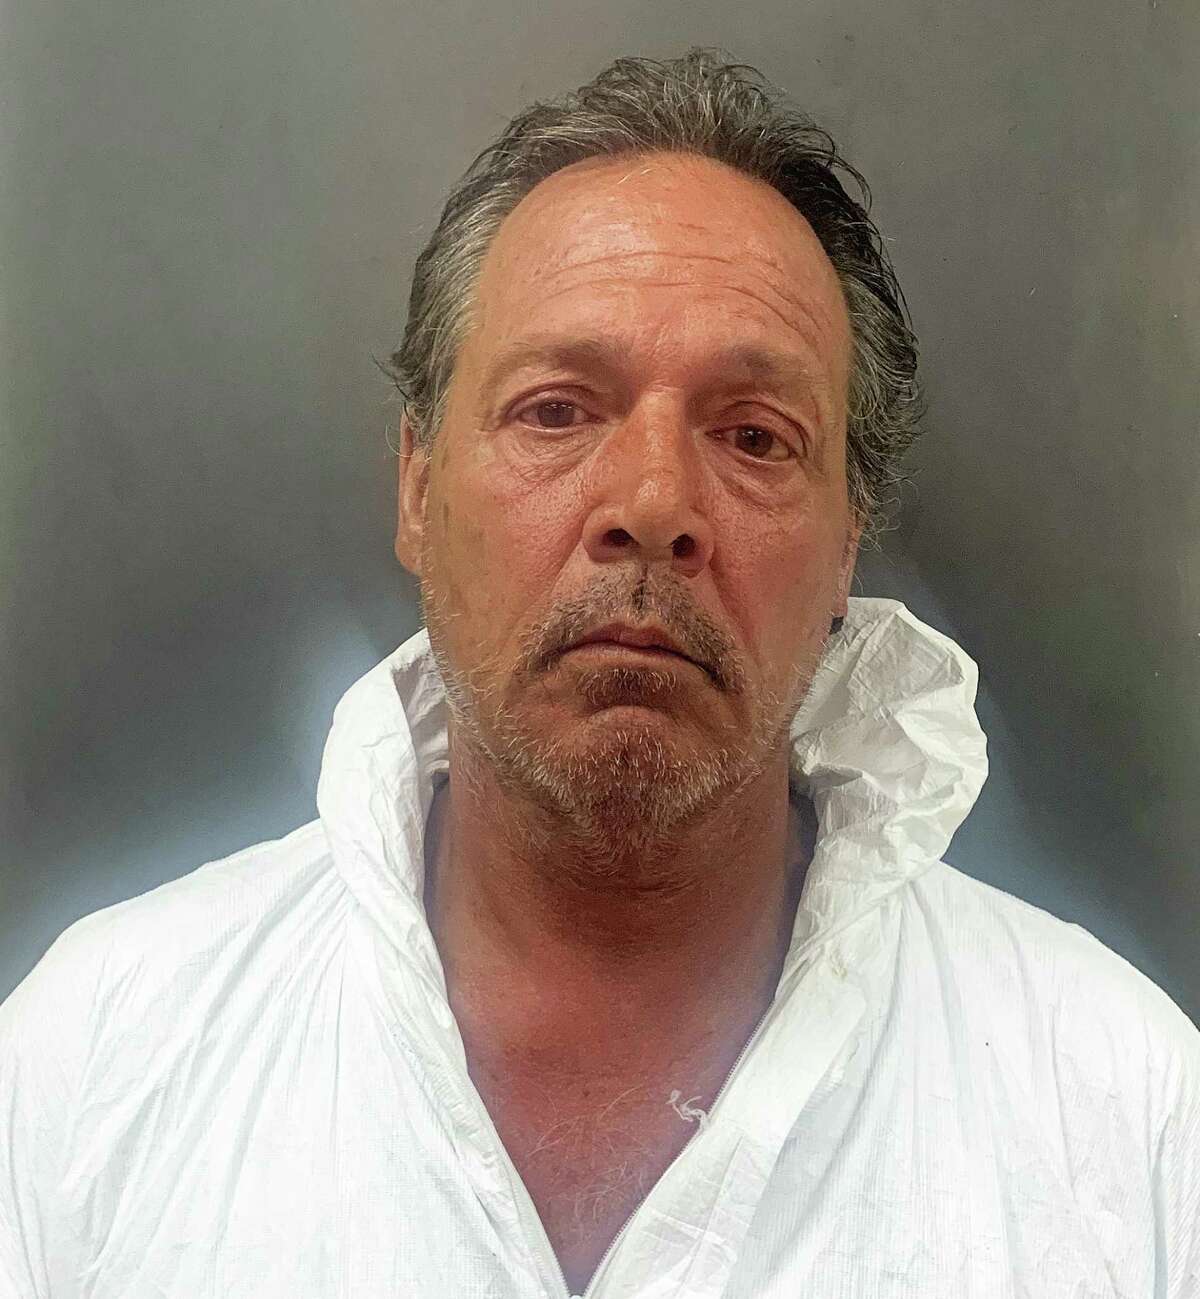 Police charged a Milford man with first-degree manslaughter after he allegedly killed an acquaintance during a fight at their Anderson Avenue address on Sunday, May 20, 2019. Ricky Garcia, 57, was being held in lieu of $250,000 bond to be arraigned Tuesday in the death of 49-year-old Christopher Peckham.